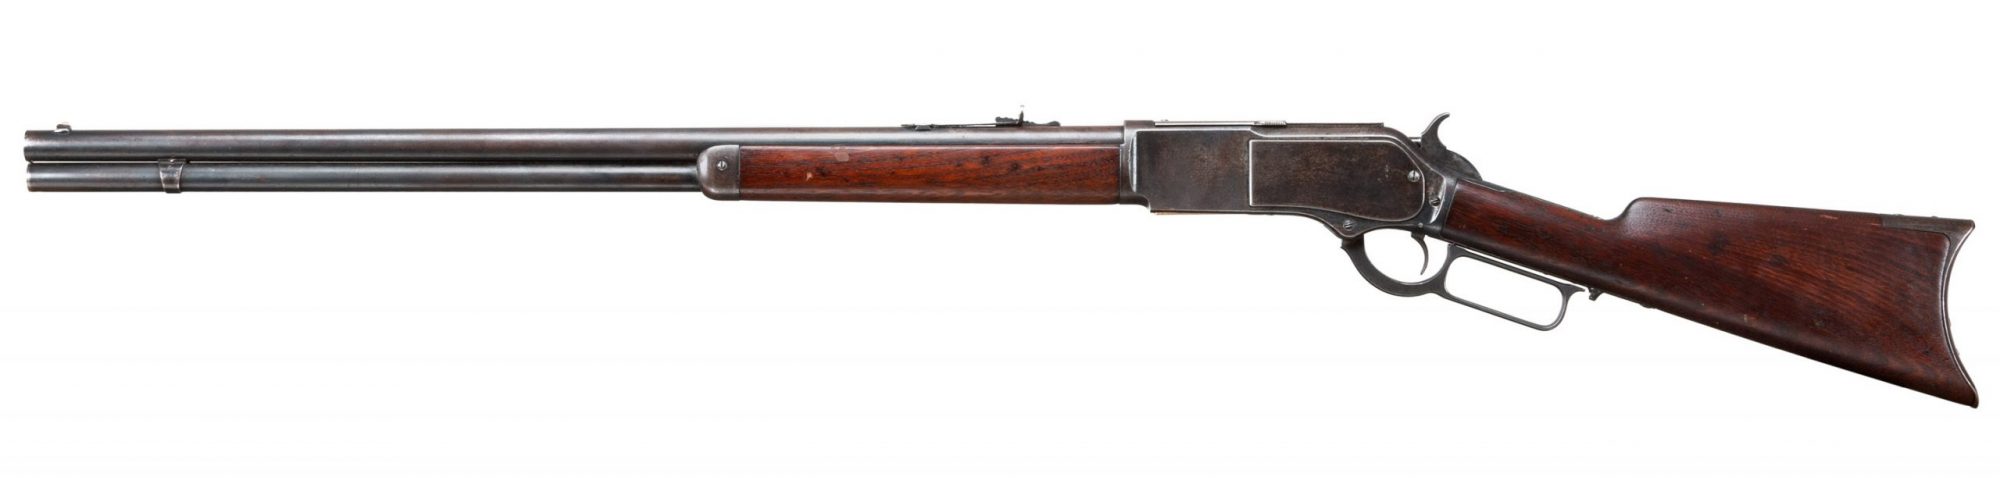 Photo of an antique Winchester Model 1876 from 1881, sold as-is by Turnbull Restoration